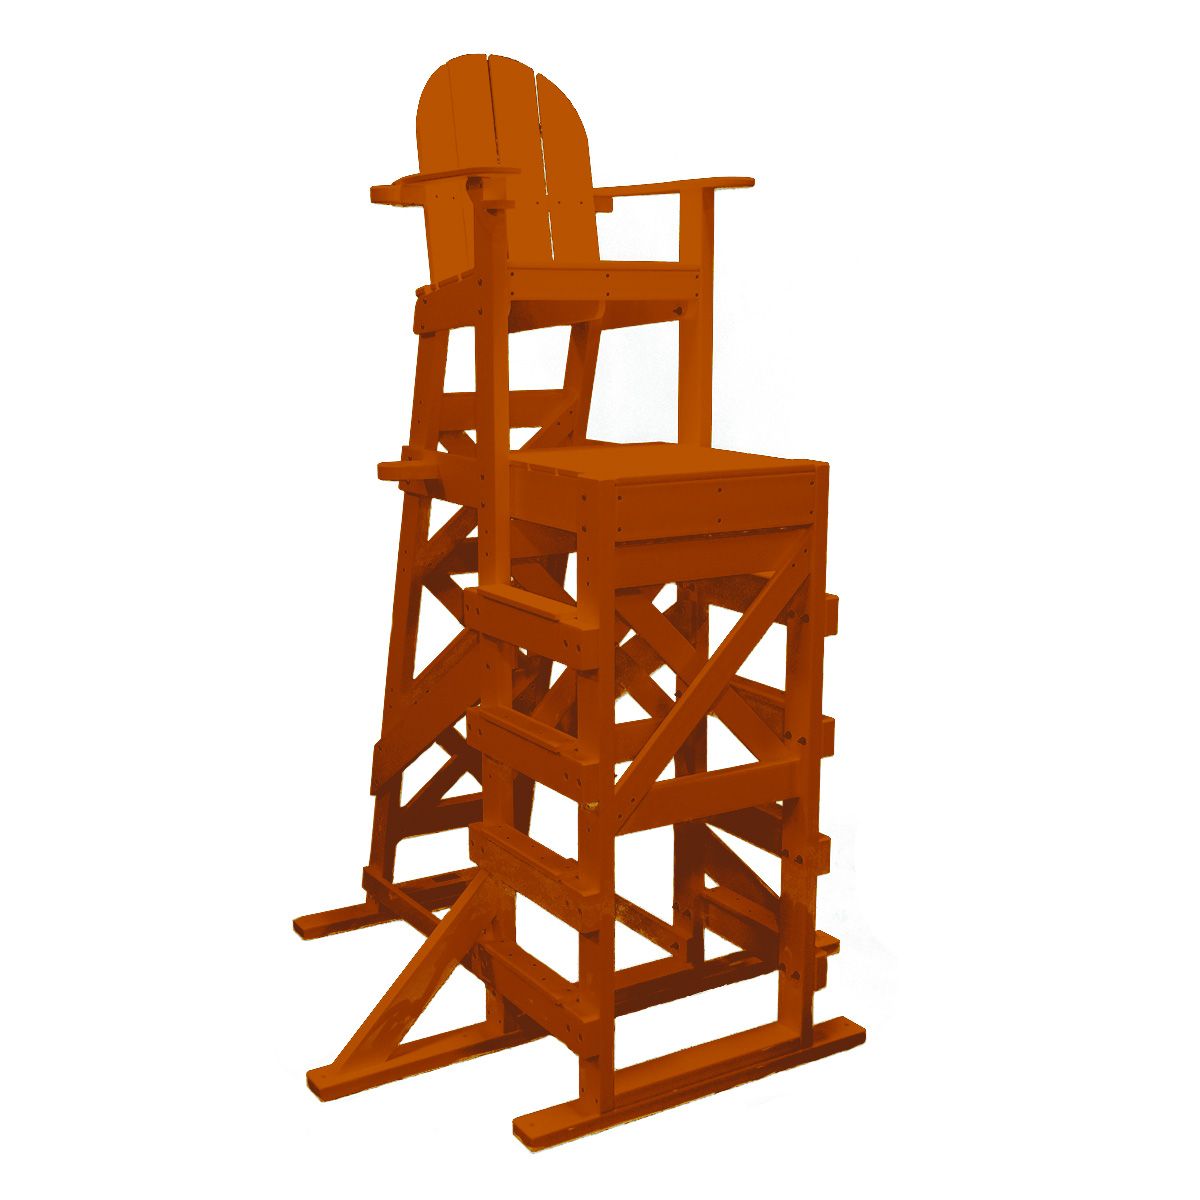 Tailwind Furniture Recycled Plastic XTLG-540 X-Tall, Side Step Lifeguard Chair - Seat Height: 72” - LEAD TIME TO SHIP 10 TO 12 BUSINESS DAYS